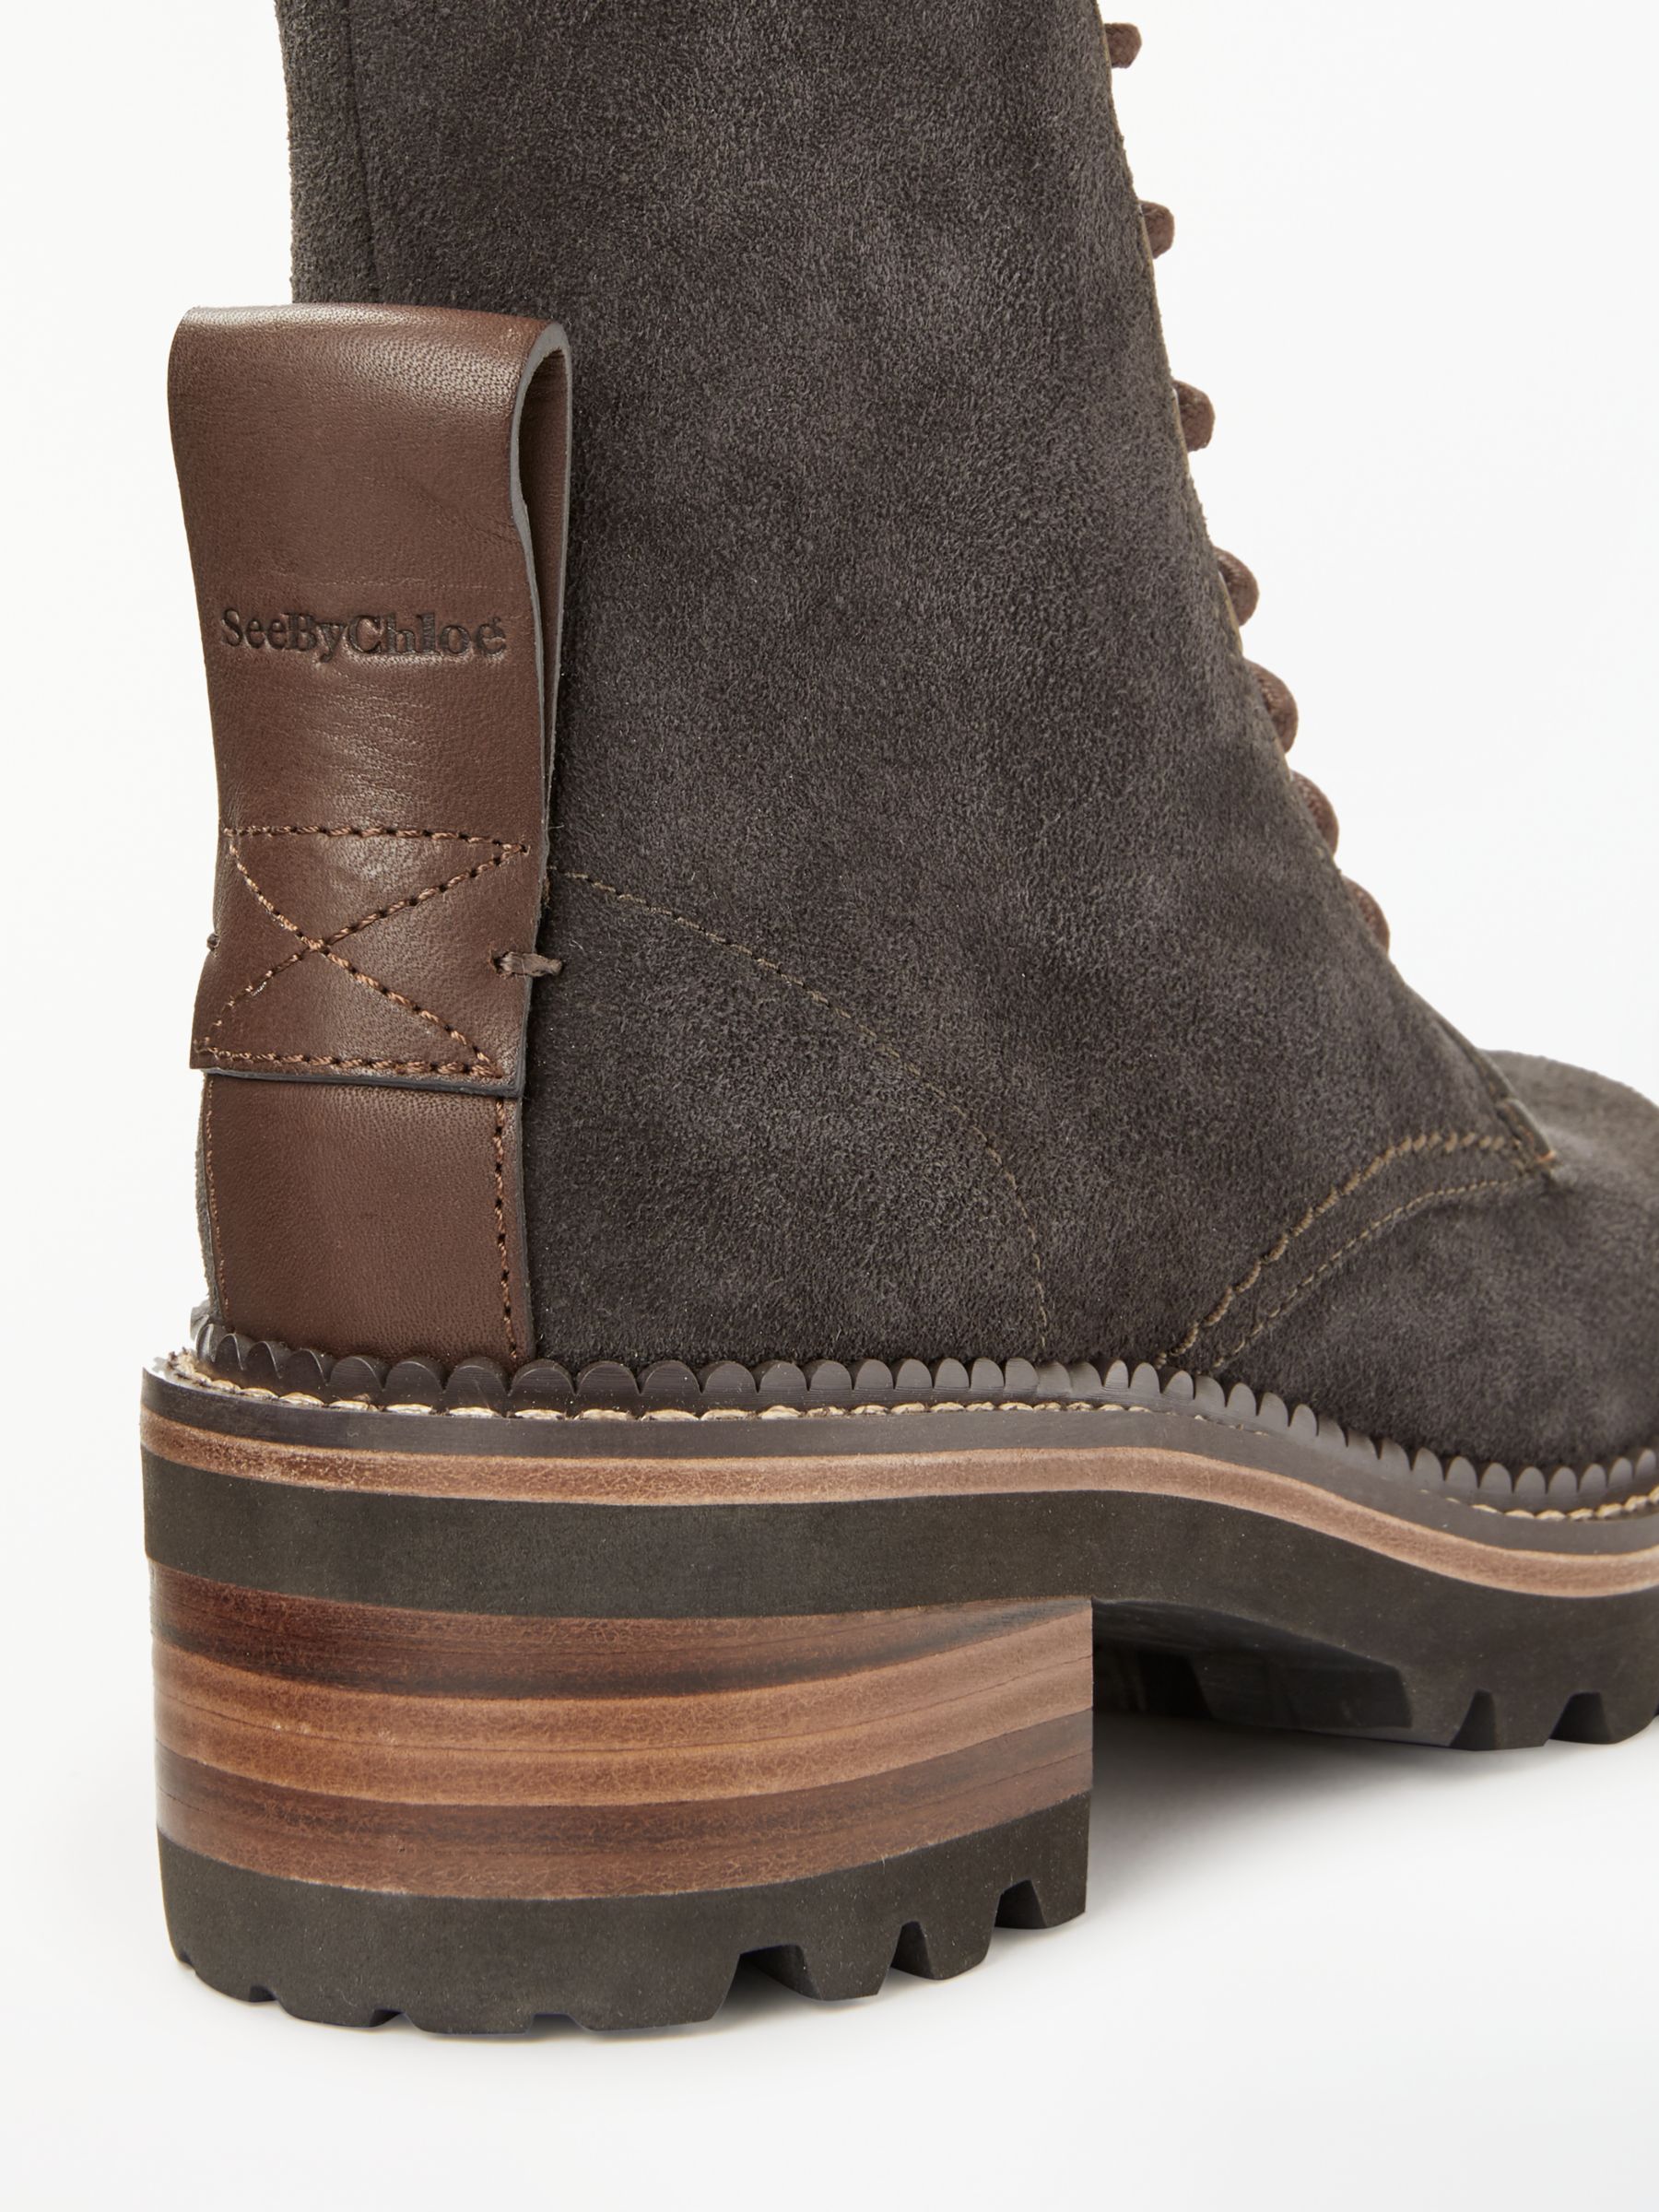 see by chloe ankle boots uk